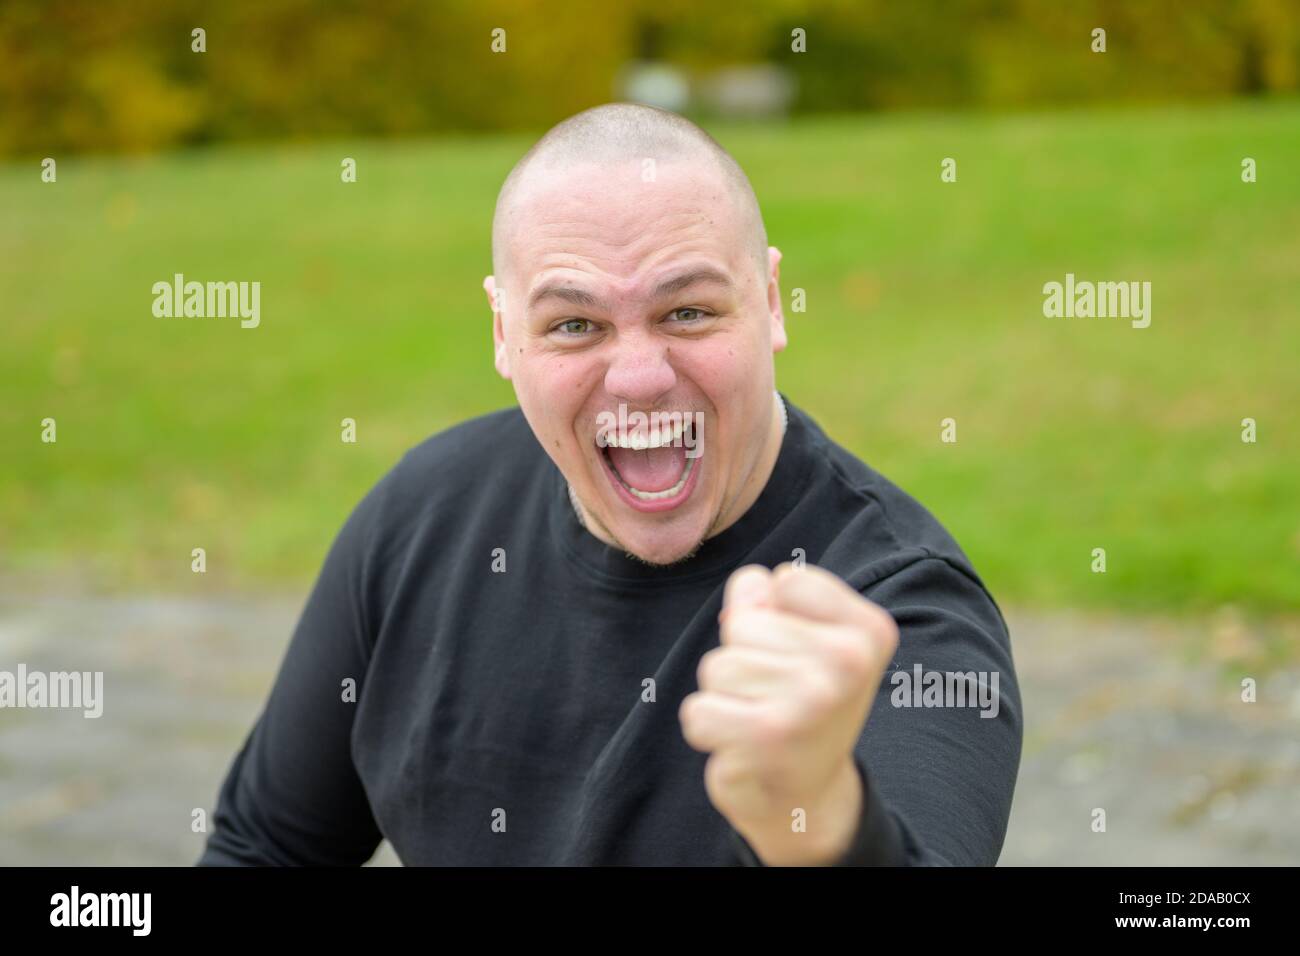 Aggressive threatening angry young man yelling at the camera as he punches with his fist outdoors in a park Stock Photo